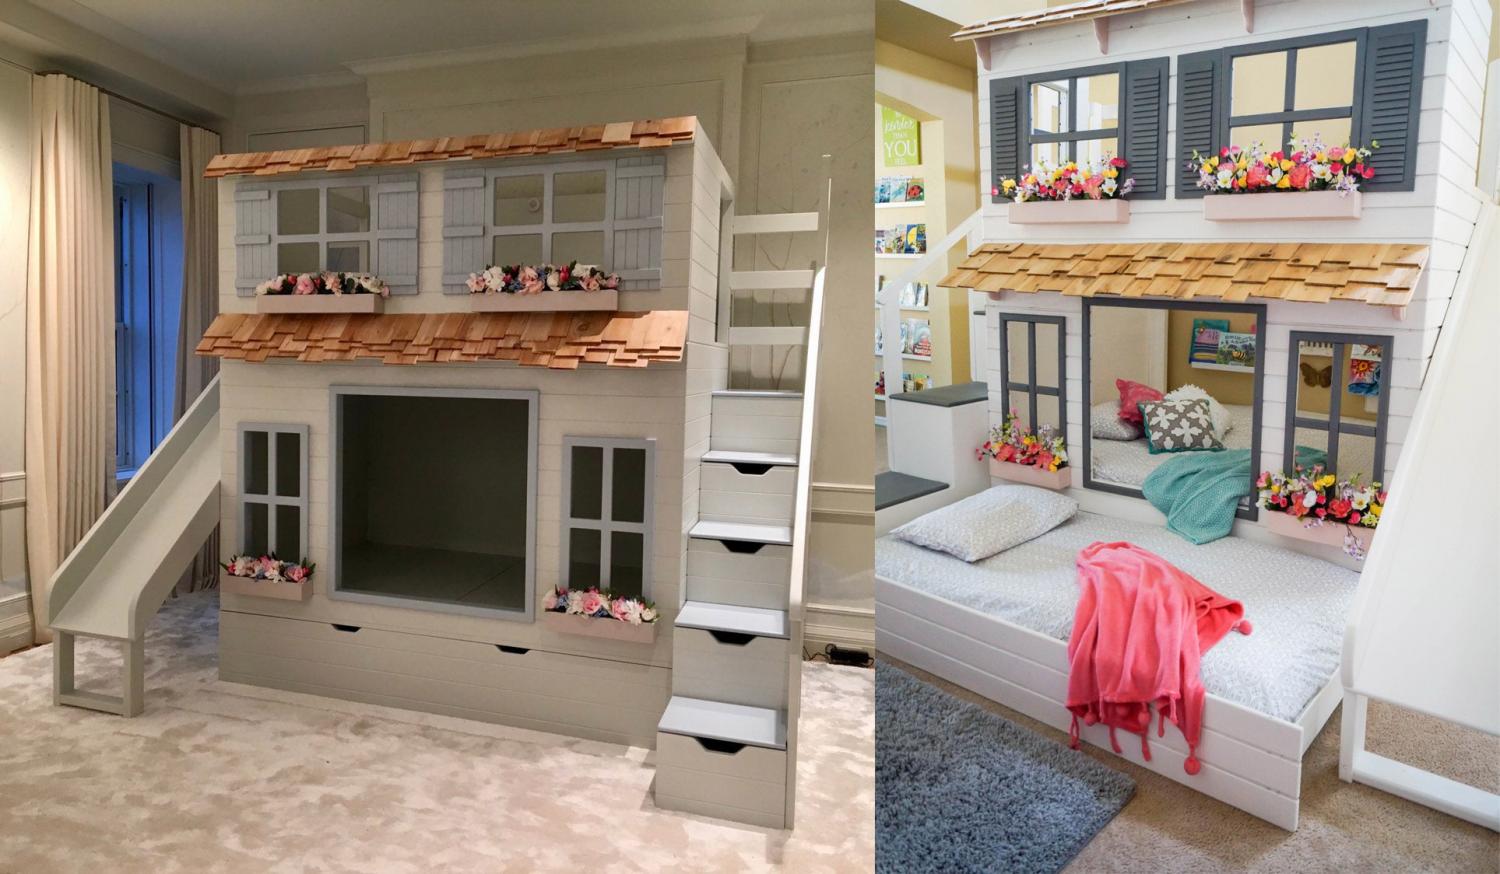 This Diy Farmhouse Bunk Bed Is The Most, Farmhouse Bunk Beds